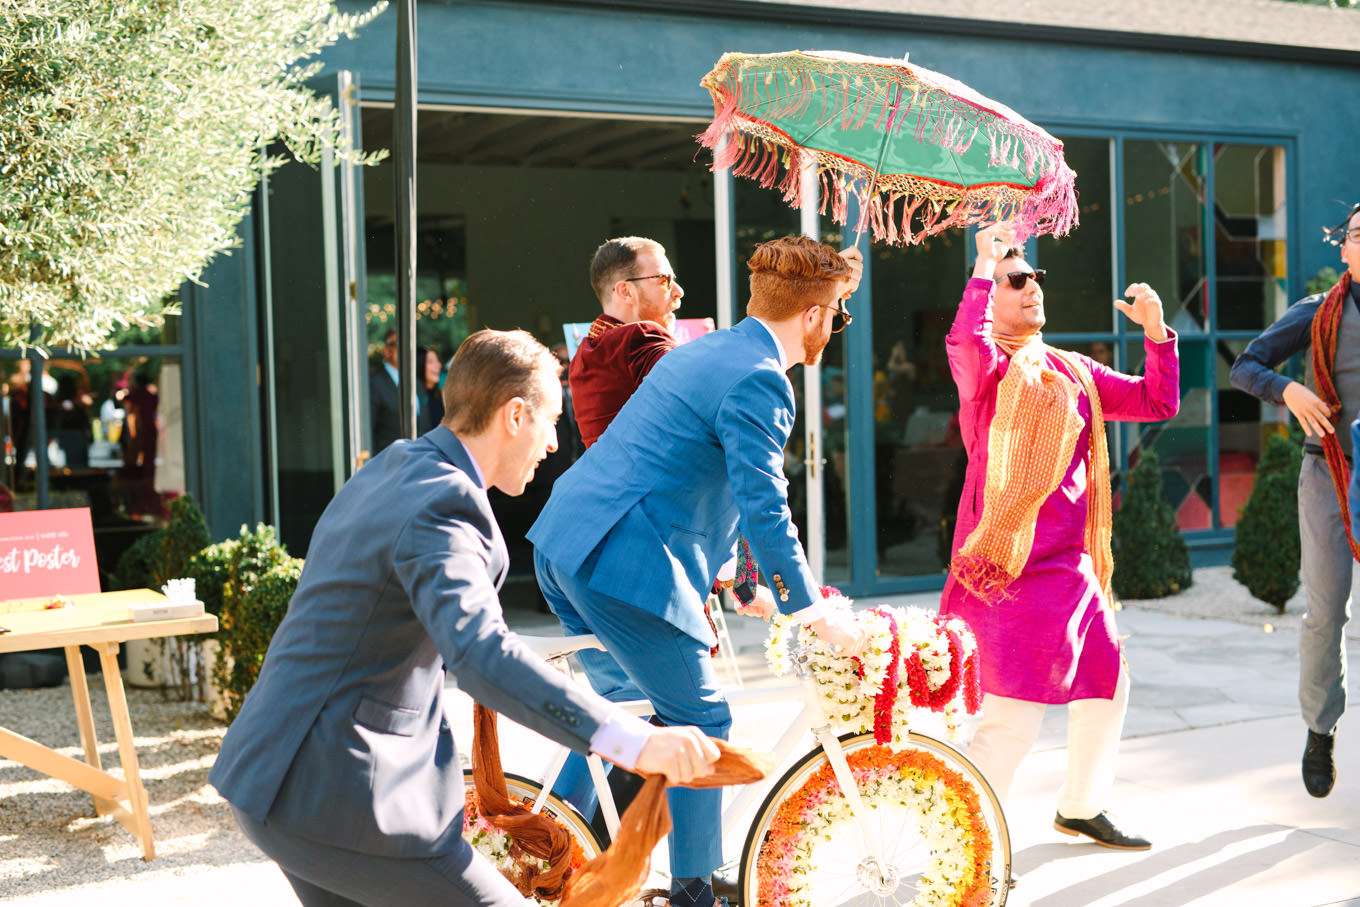 Groom riding into wedding ceremony on white Baraat bicycle. Two Disney artists create a unique and colorful Indian Fusion wedding at The Fig House Los Angeles, featured on Green Wedding Shoes. | Colorful and elevated wedding inspiration for fun-loving couples in Southern California | #indianwedding #indianfusionwedding #thefighouse #losangeleswedding   Source: Mary Costa Photography | Los Angeles